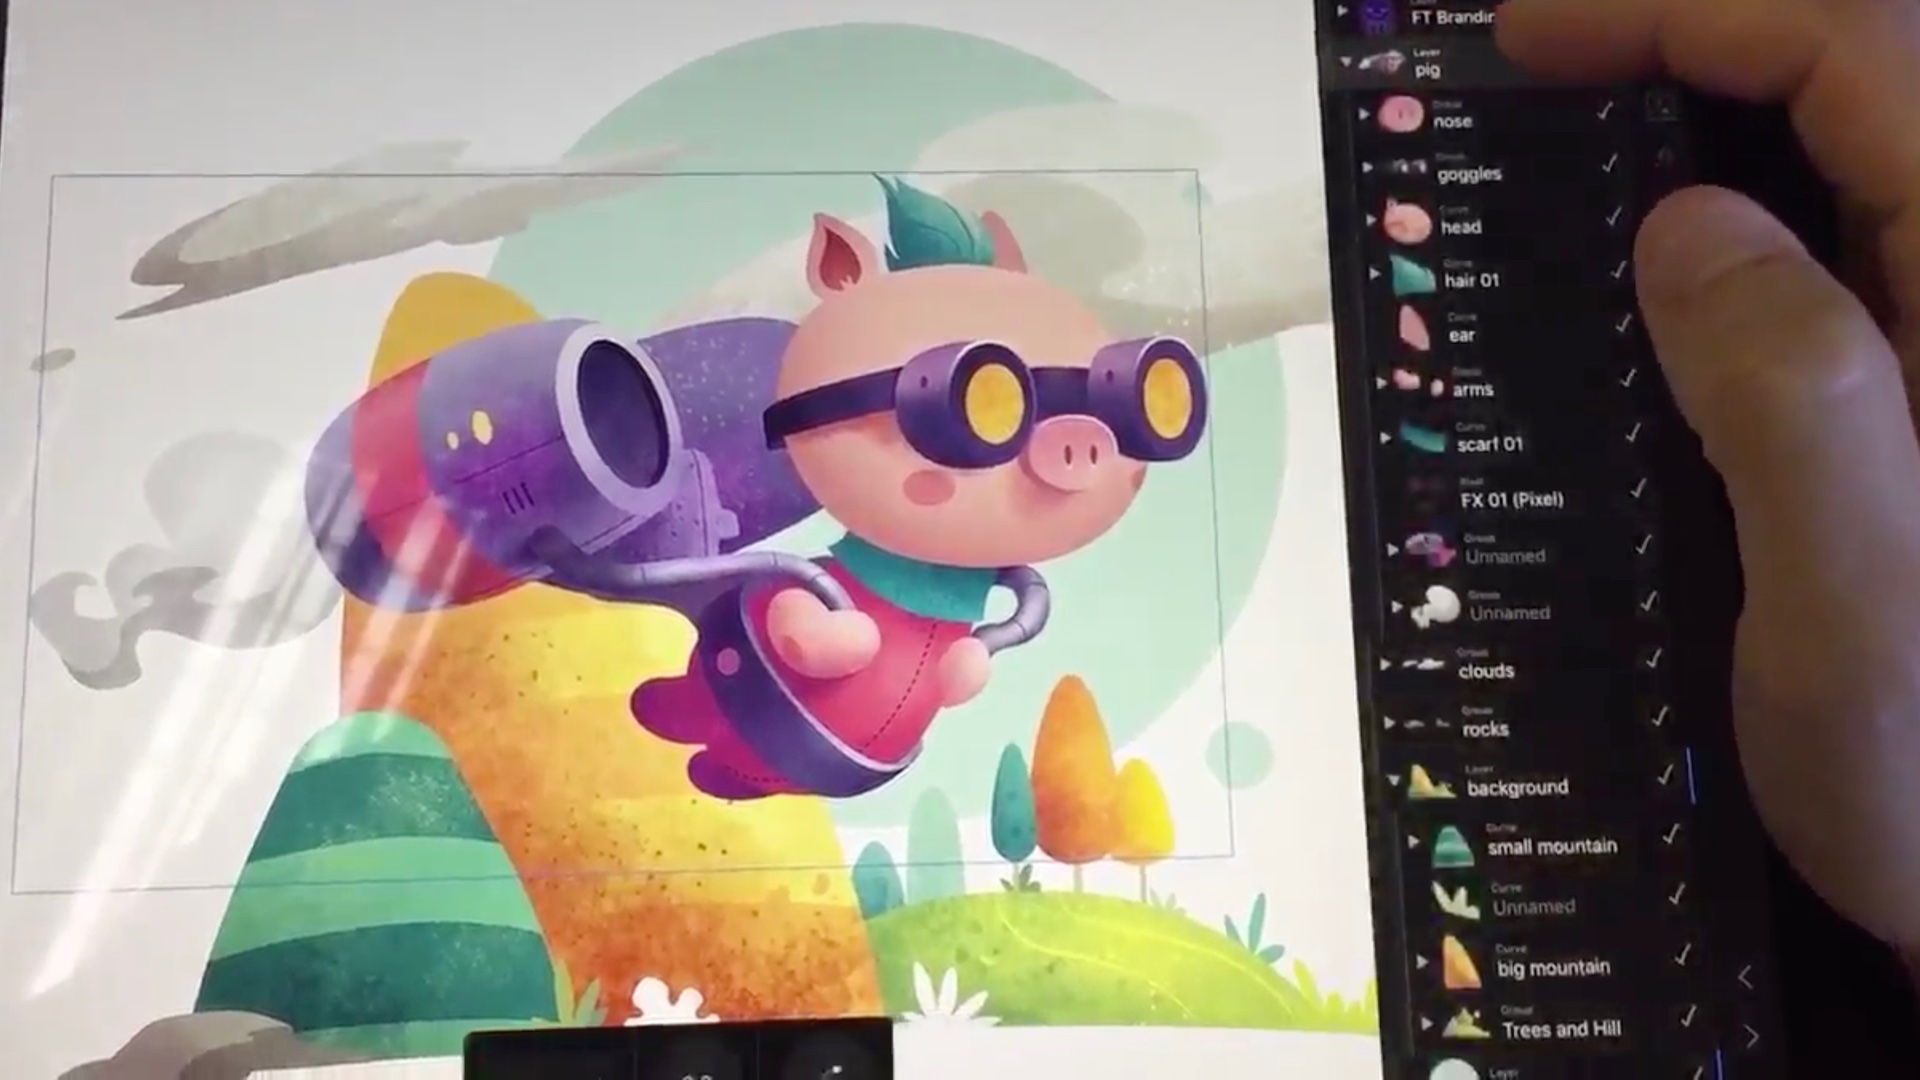 Affinity Designer for iPad teased on video - 9to5Mac